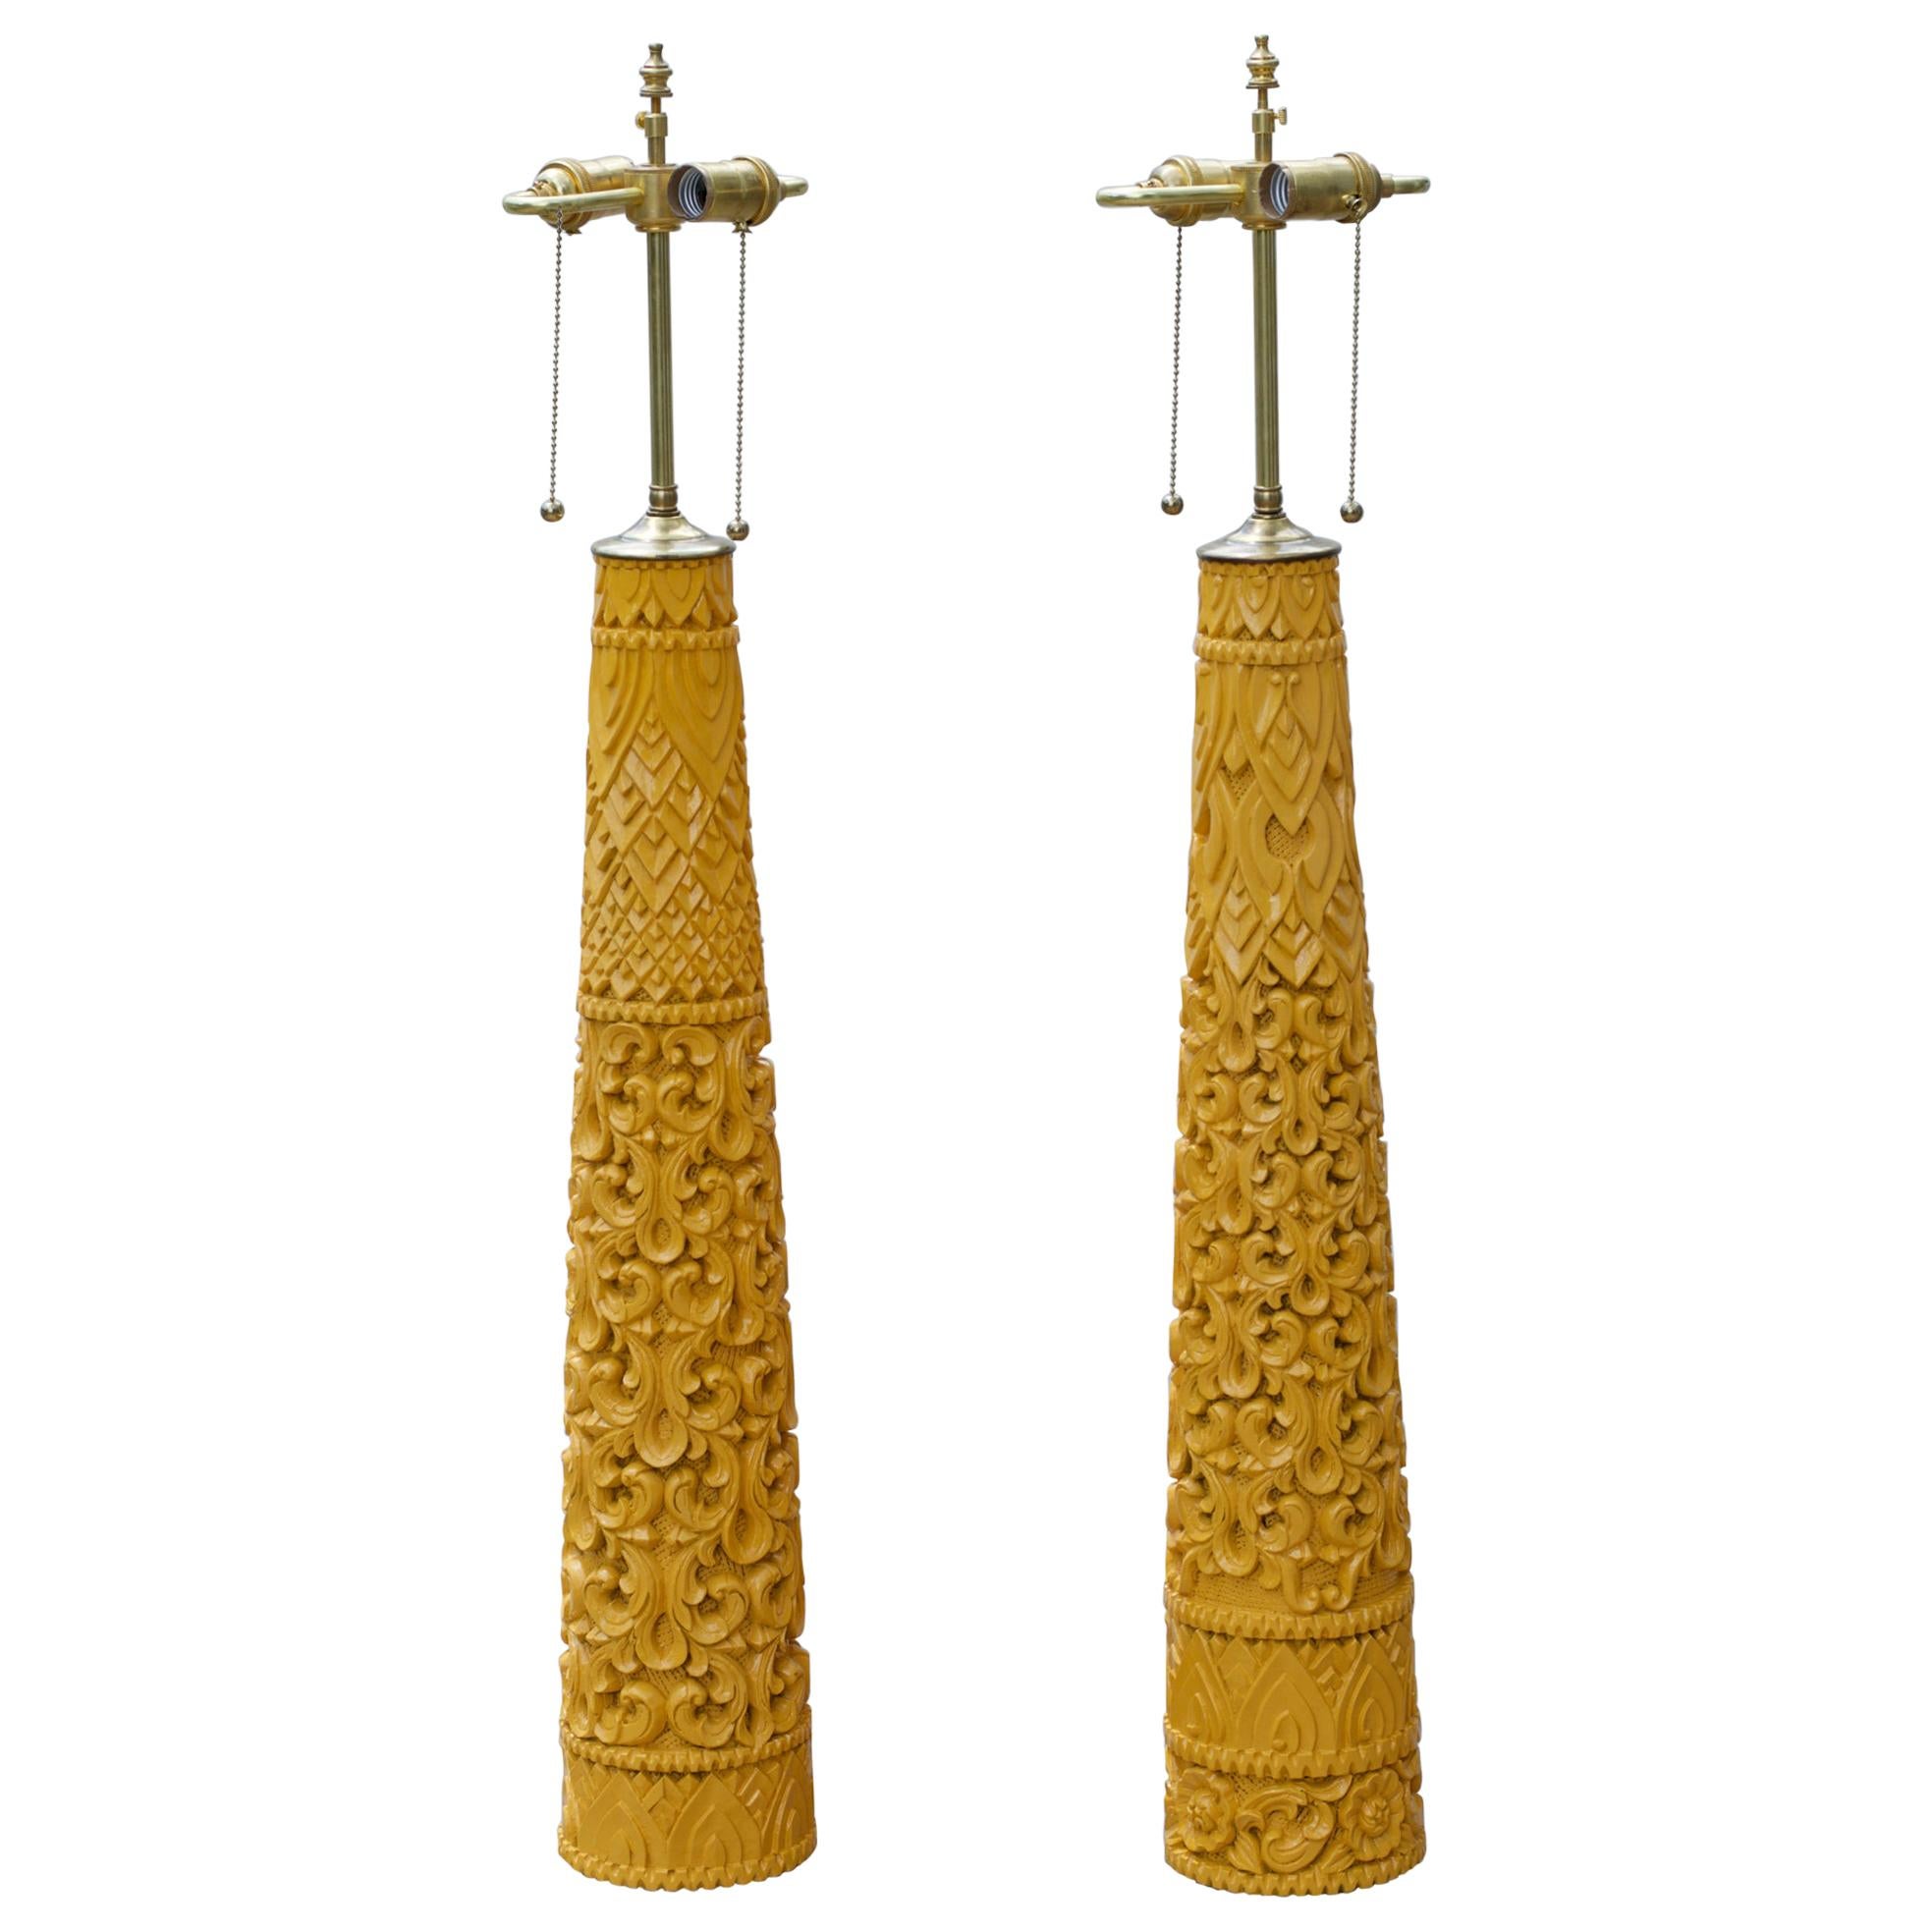 Tall Carved Wood Lamps in Marigold Yellow For Sale